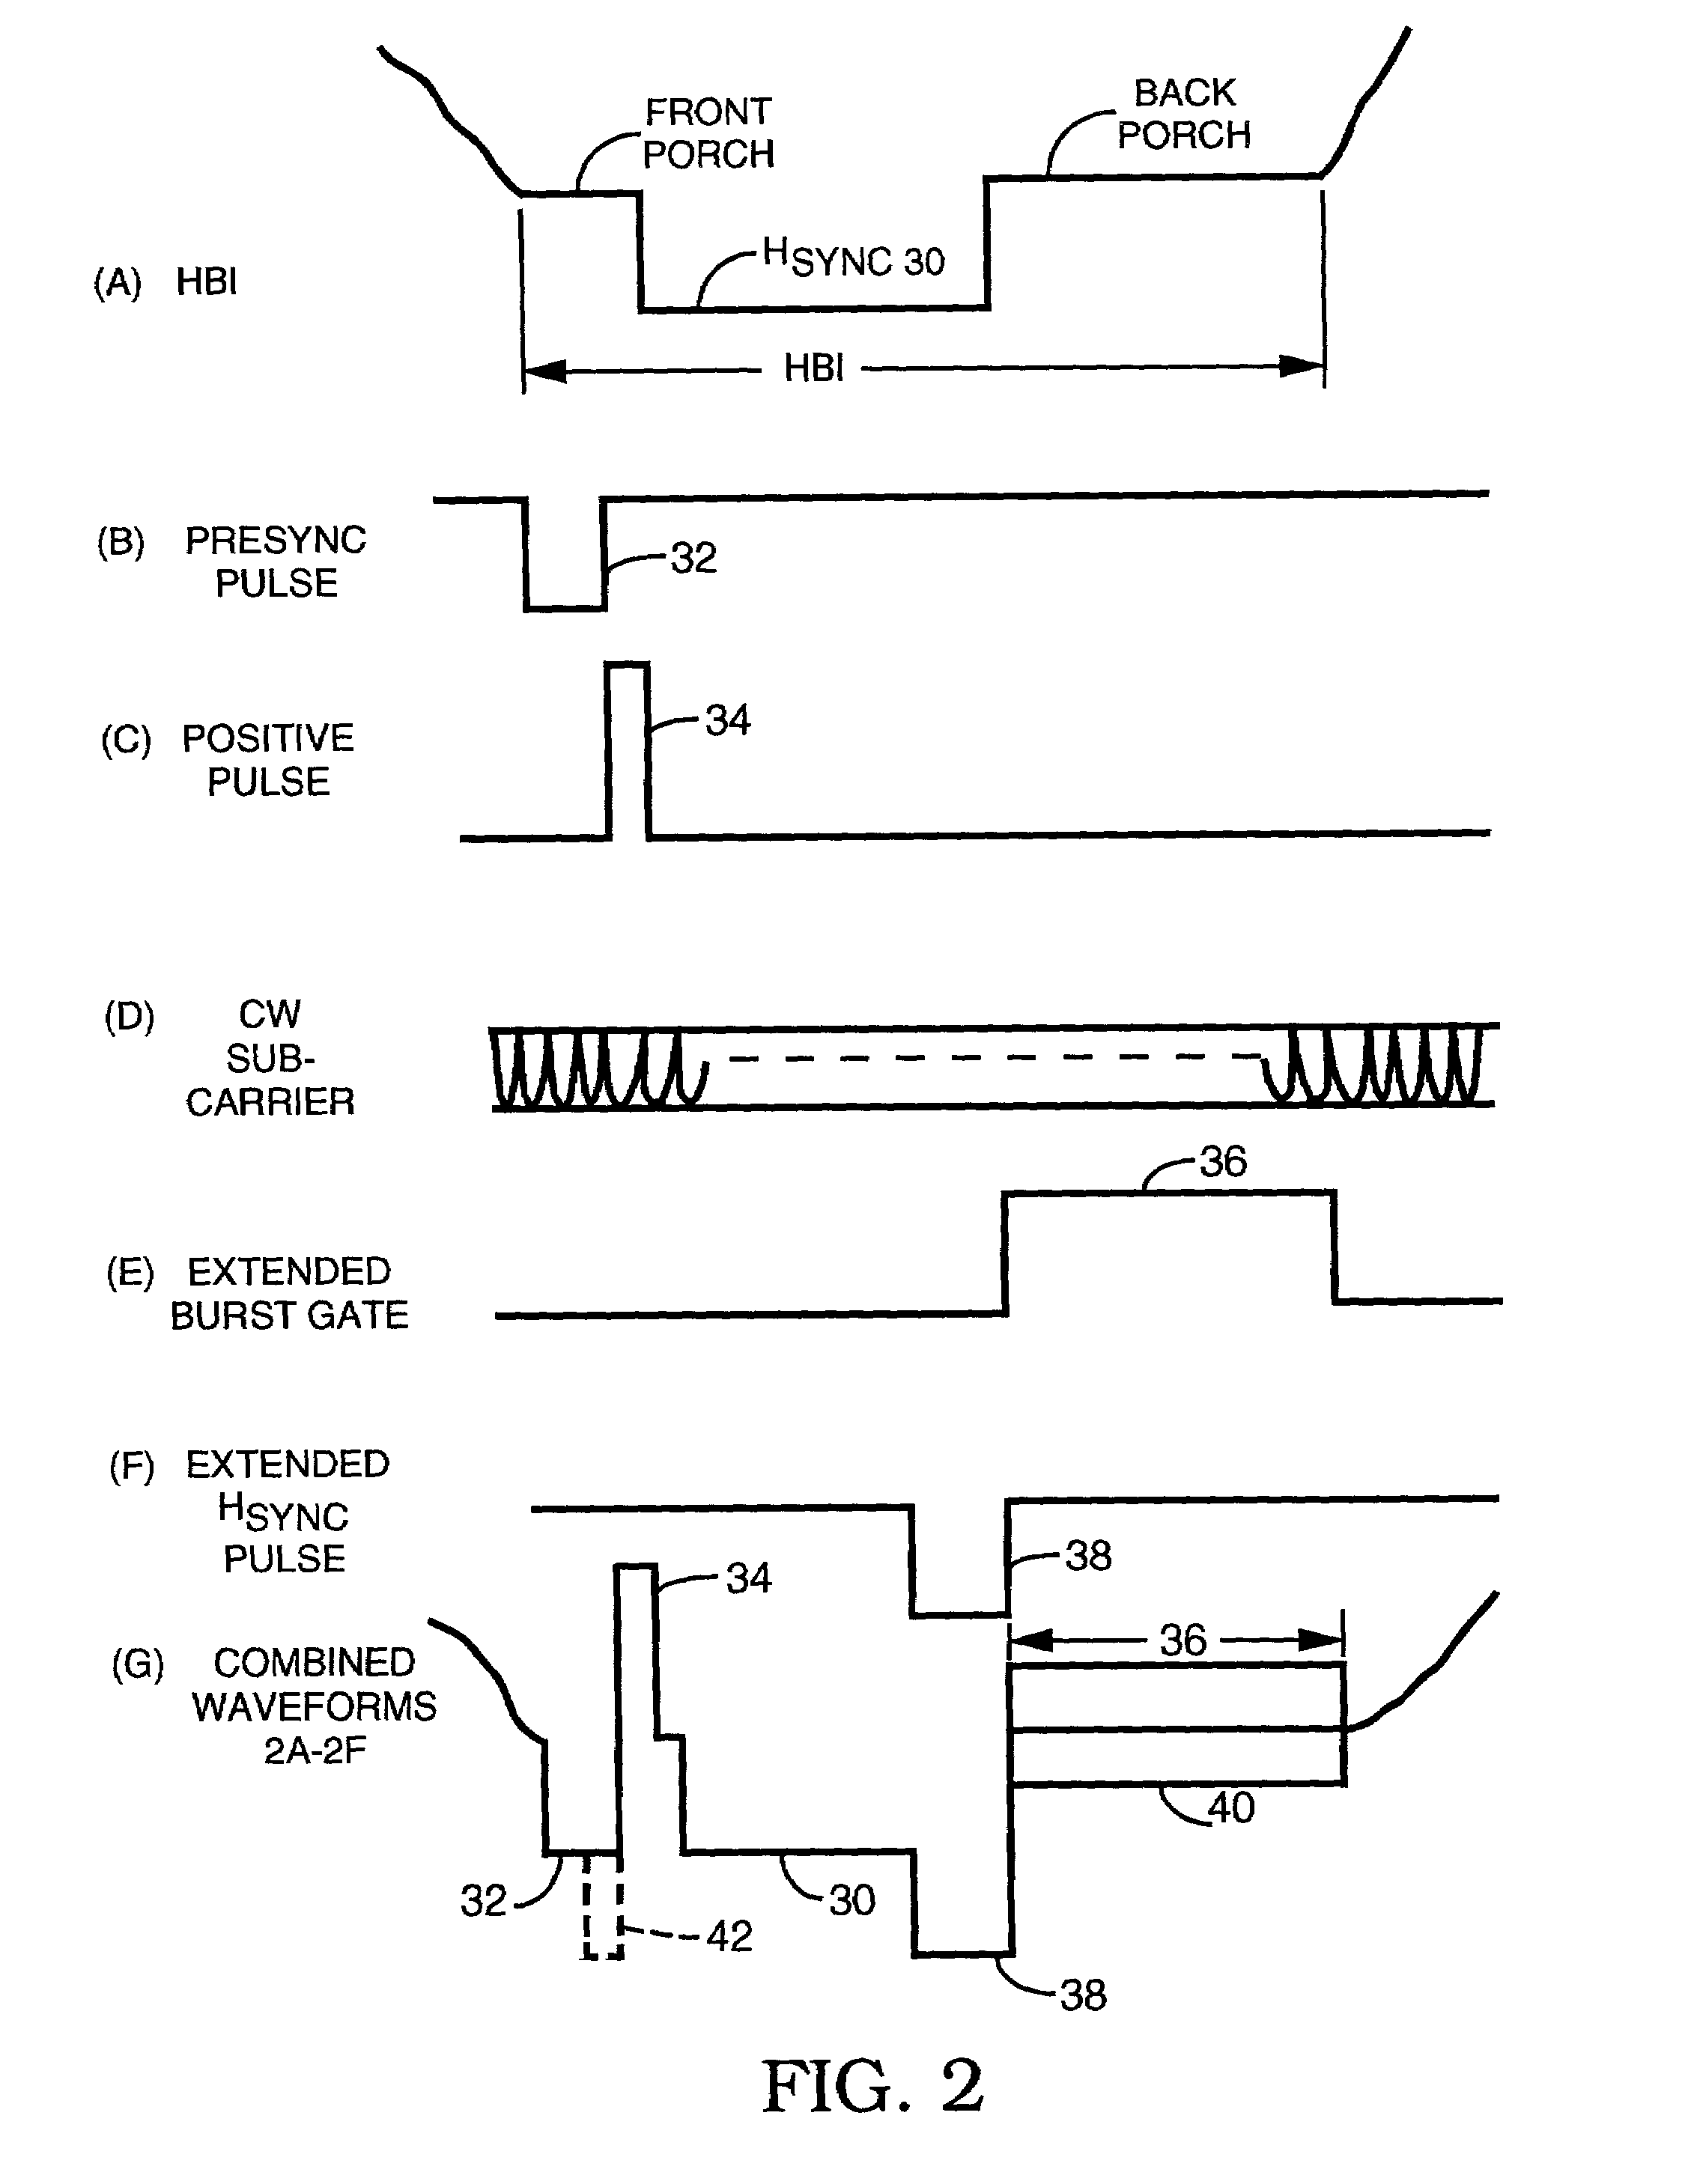 Method and apparatus for providing or enhancing copy protection by adding selected negative-going and positive-going pulses in a video signal HBI